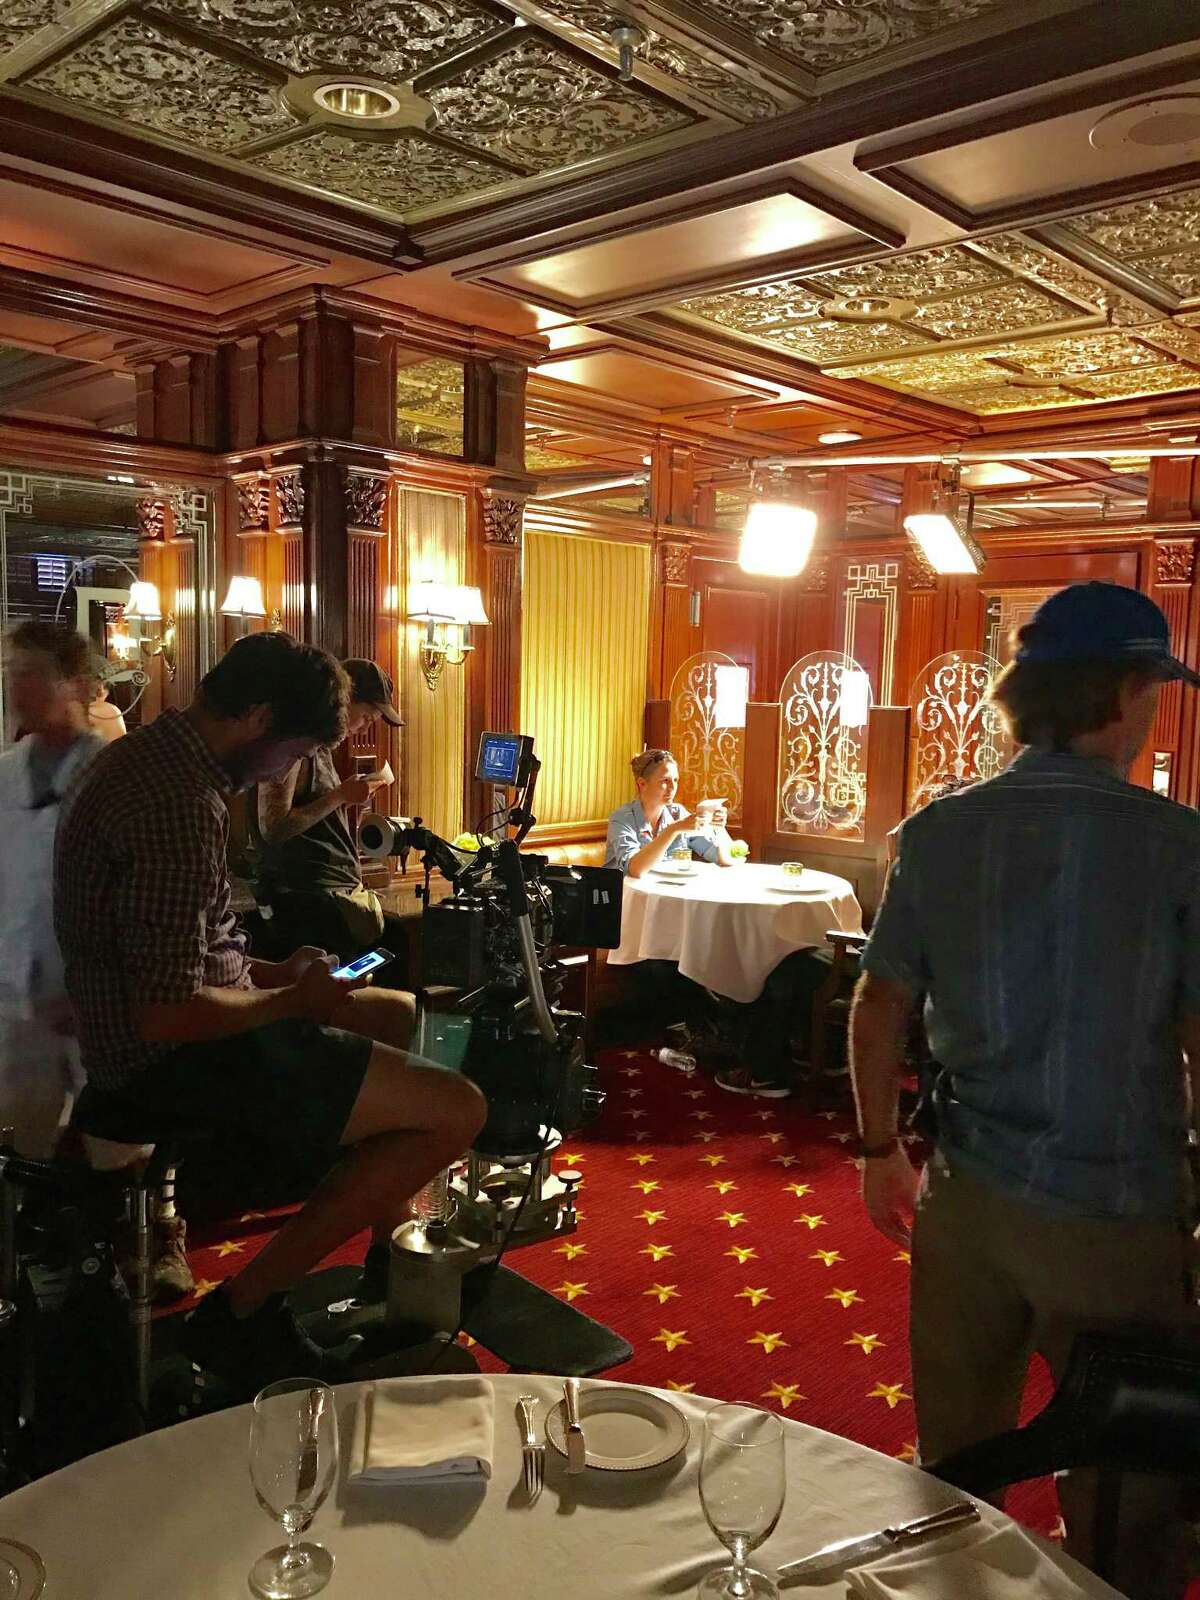 During filming on Sunday, the restaurant at Austin's Driskill Hotel served as a stand-in for Fort Worth's Petroleum Club.